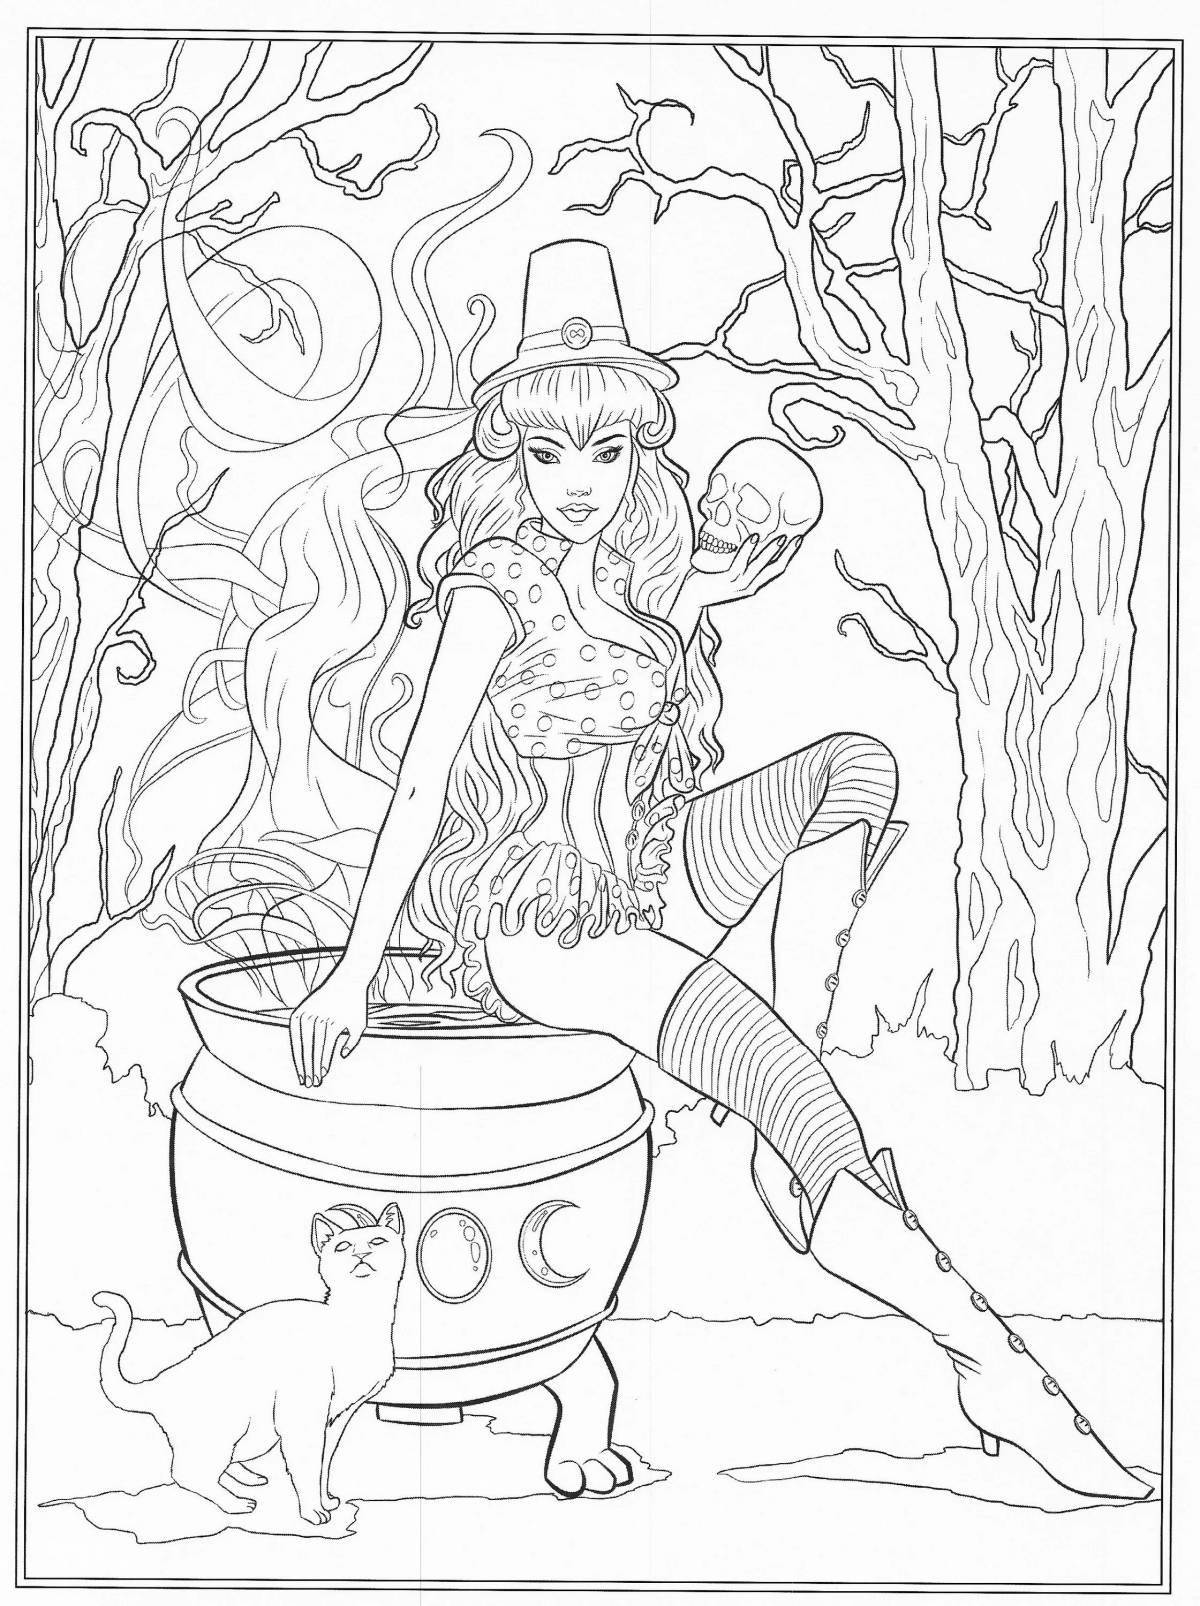 Superb aya and the witch coloring book